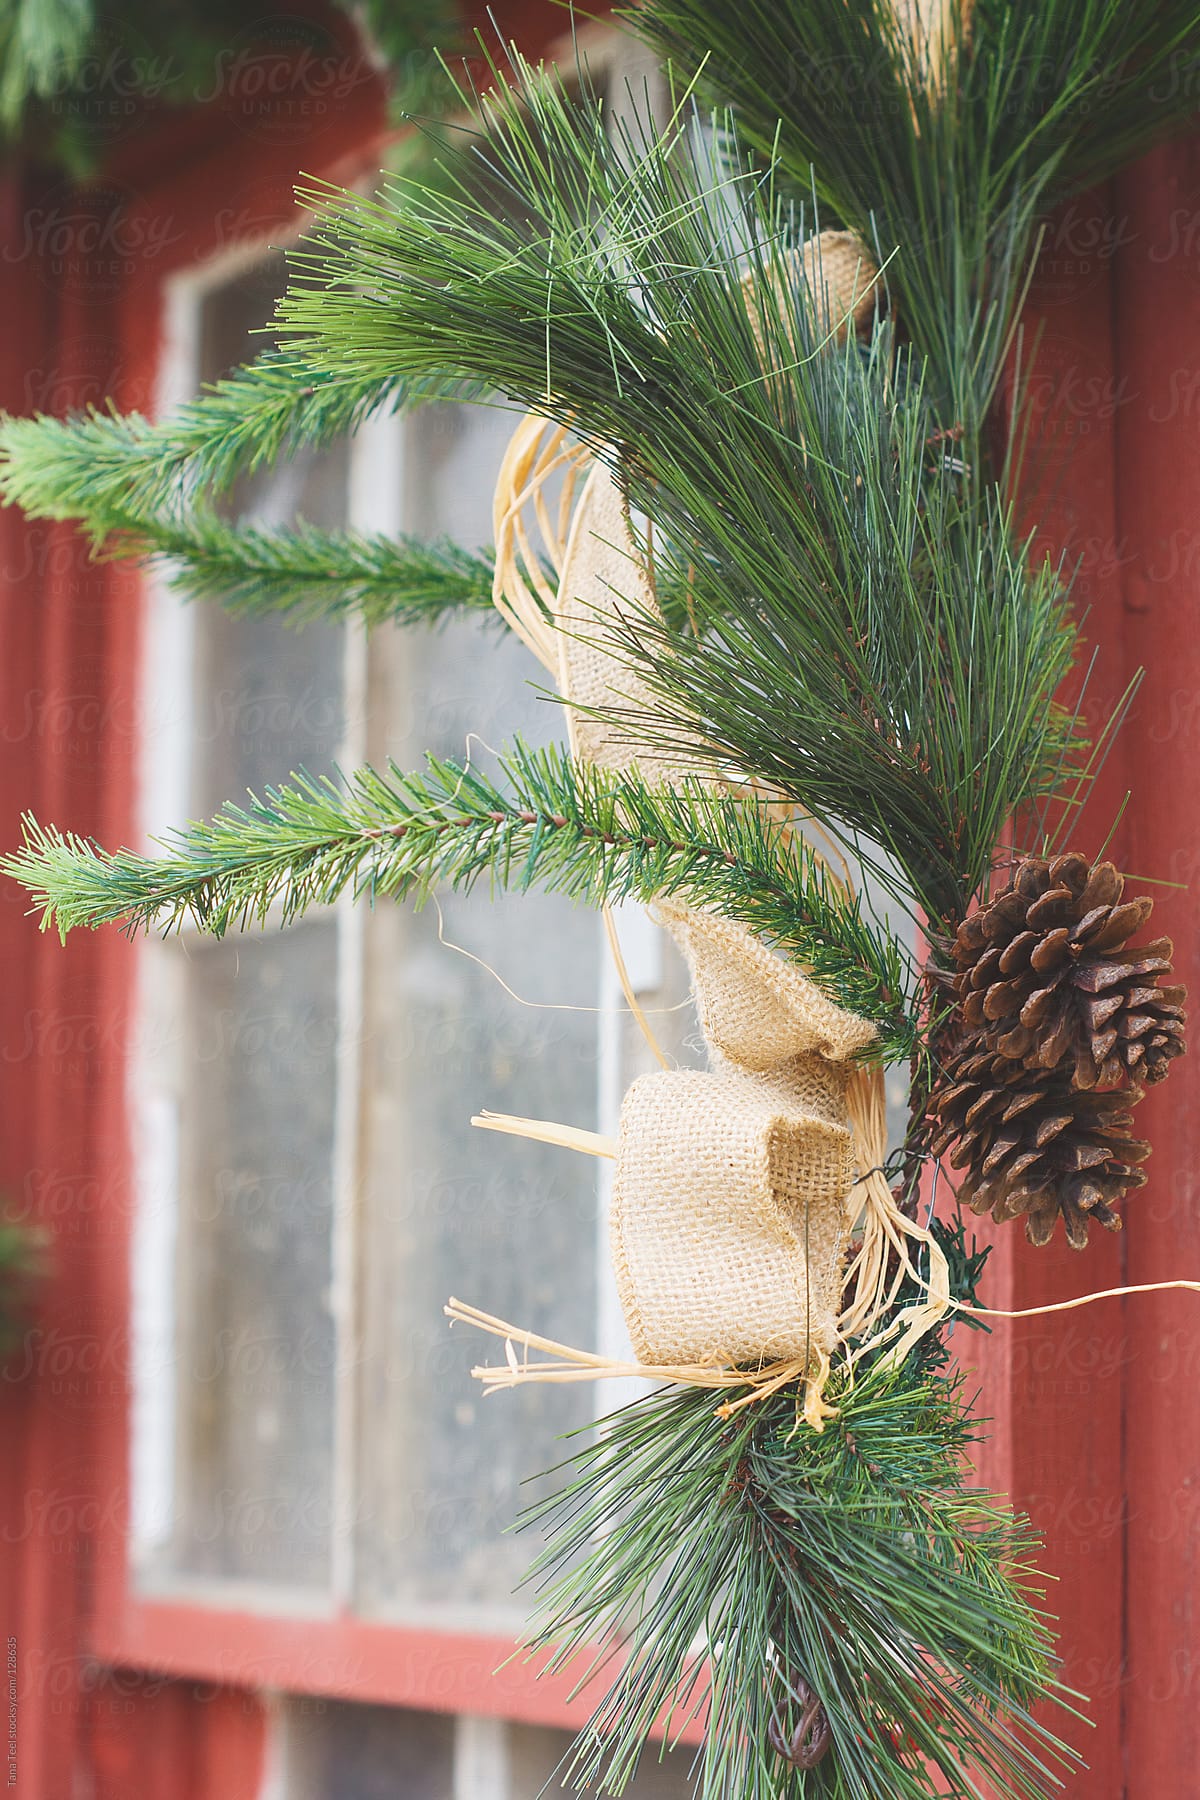 A rustic evergreen hangs from an old window for the holiday season